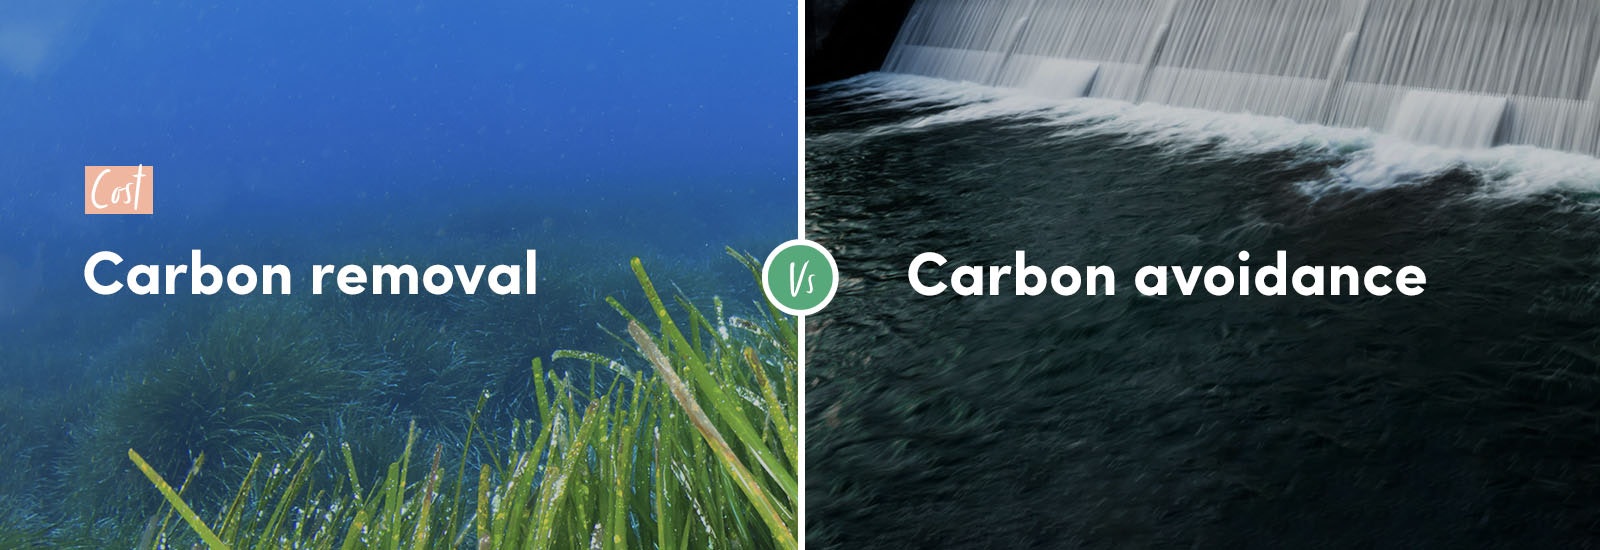 Cost - carbon removal vs. carbon avoidance